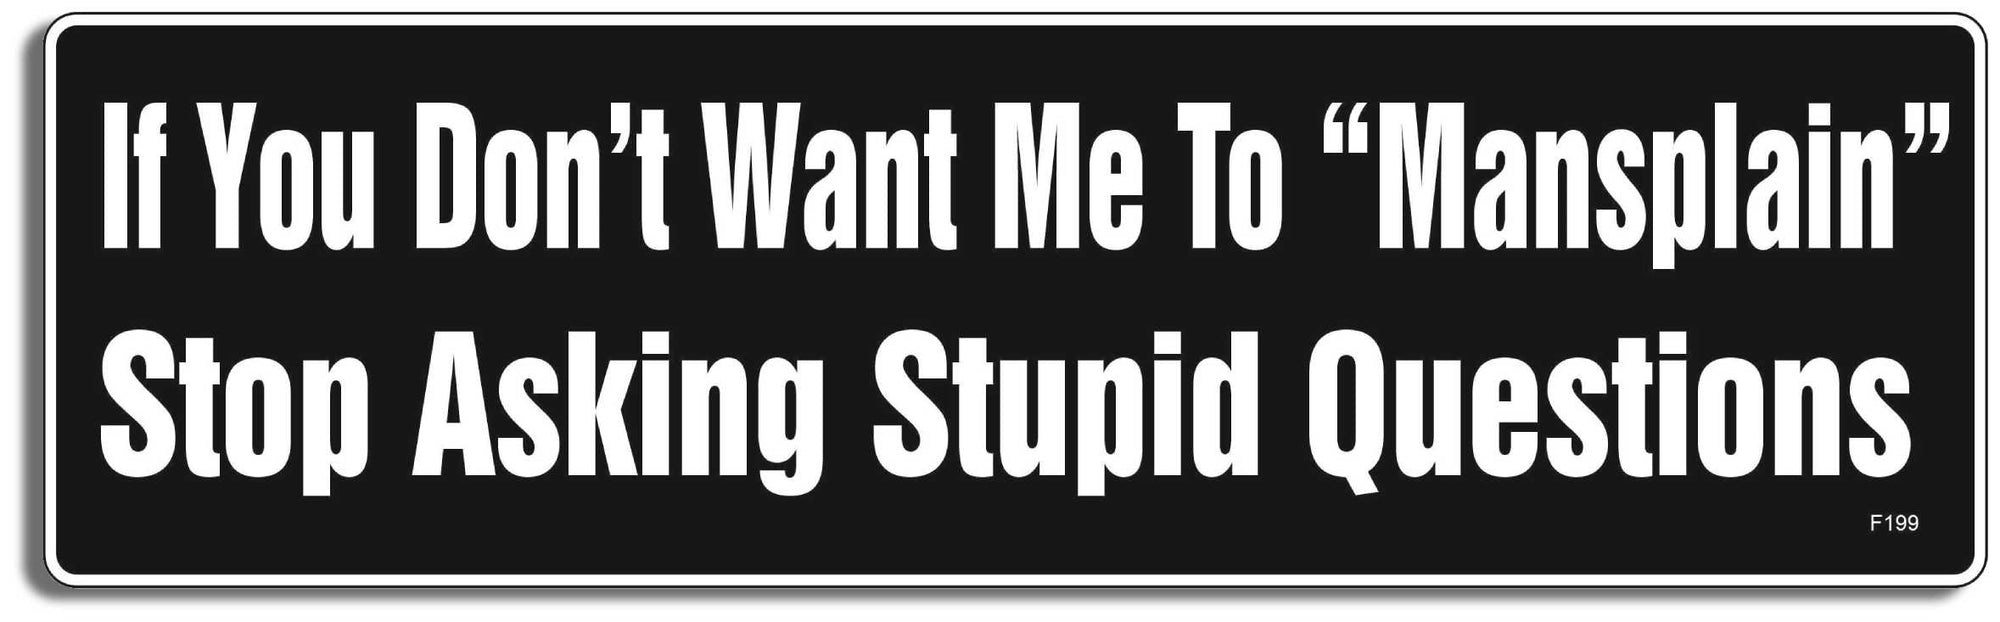 If You Don't Want Me To "Mansplain" Stop Asking Stupid Questions  -  3" x 10" -  Decal Bumper Sticker-funny Bumper Sticker Car Magnet If You Don't Want Me To "Mansplain"-  Decal for cars funny, funny quote